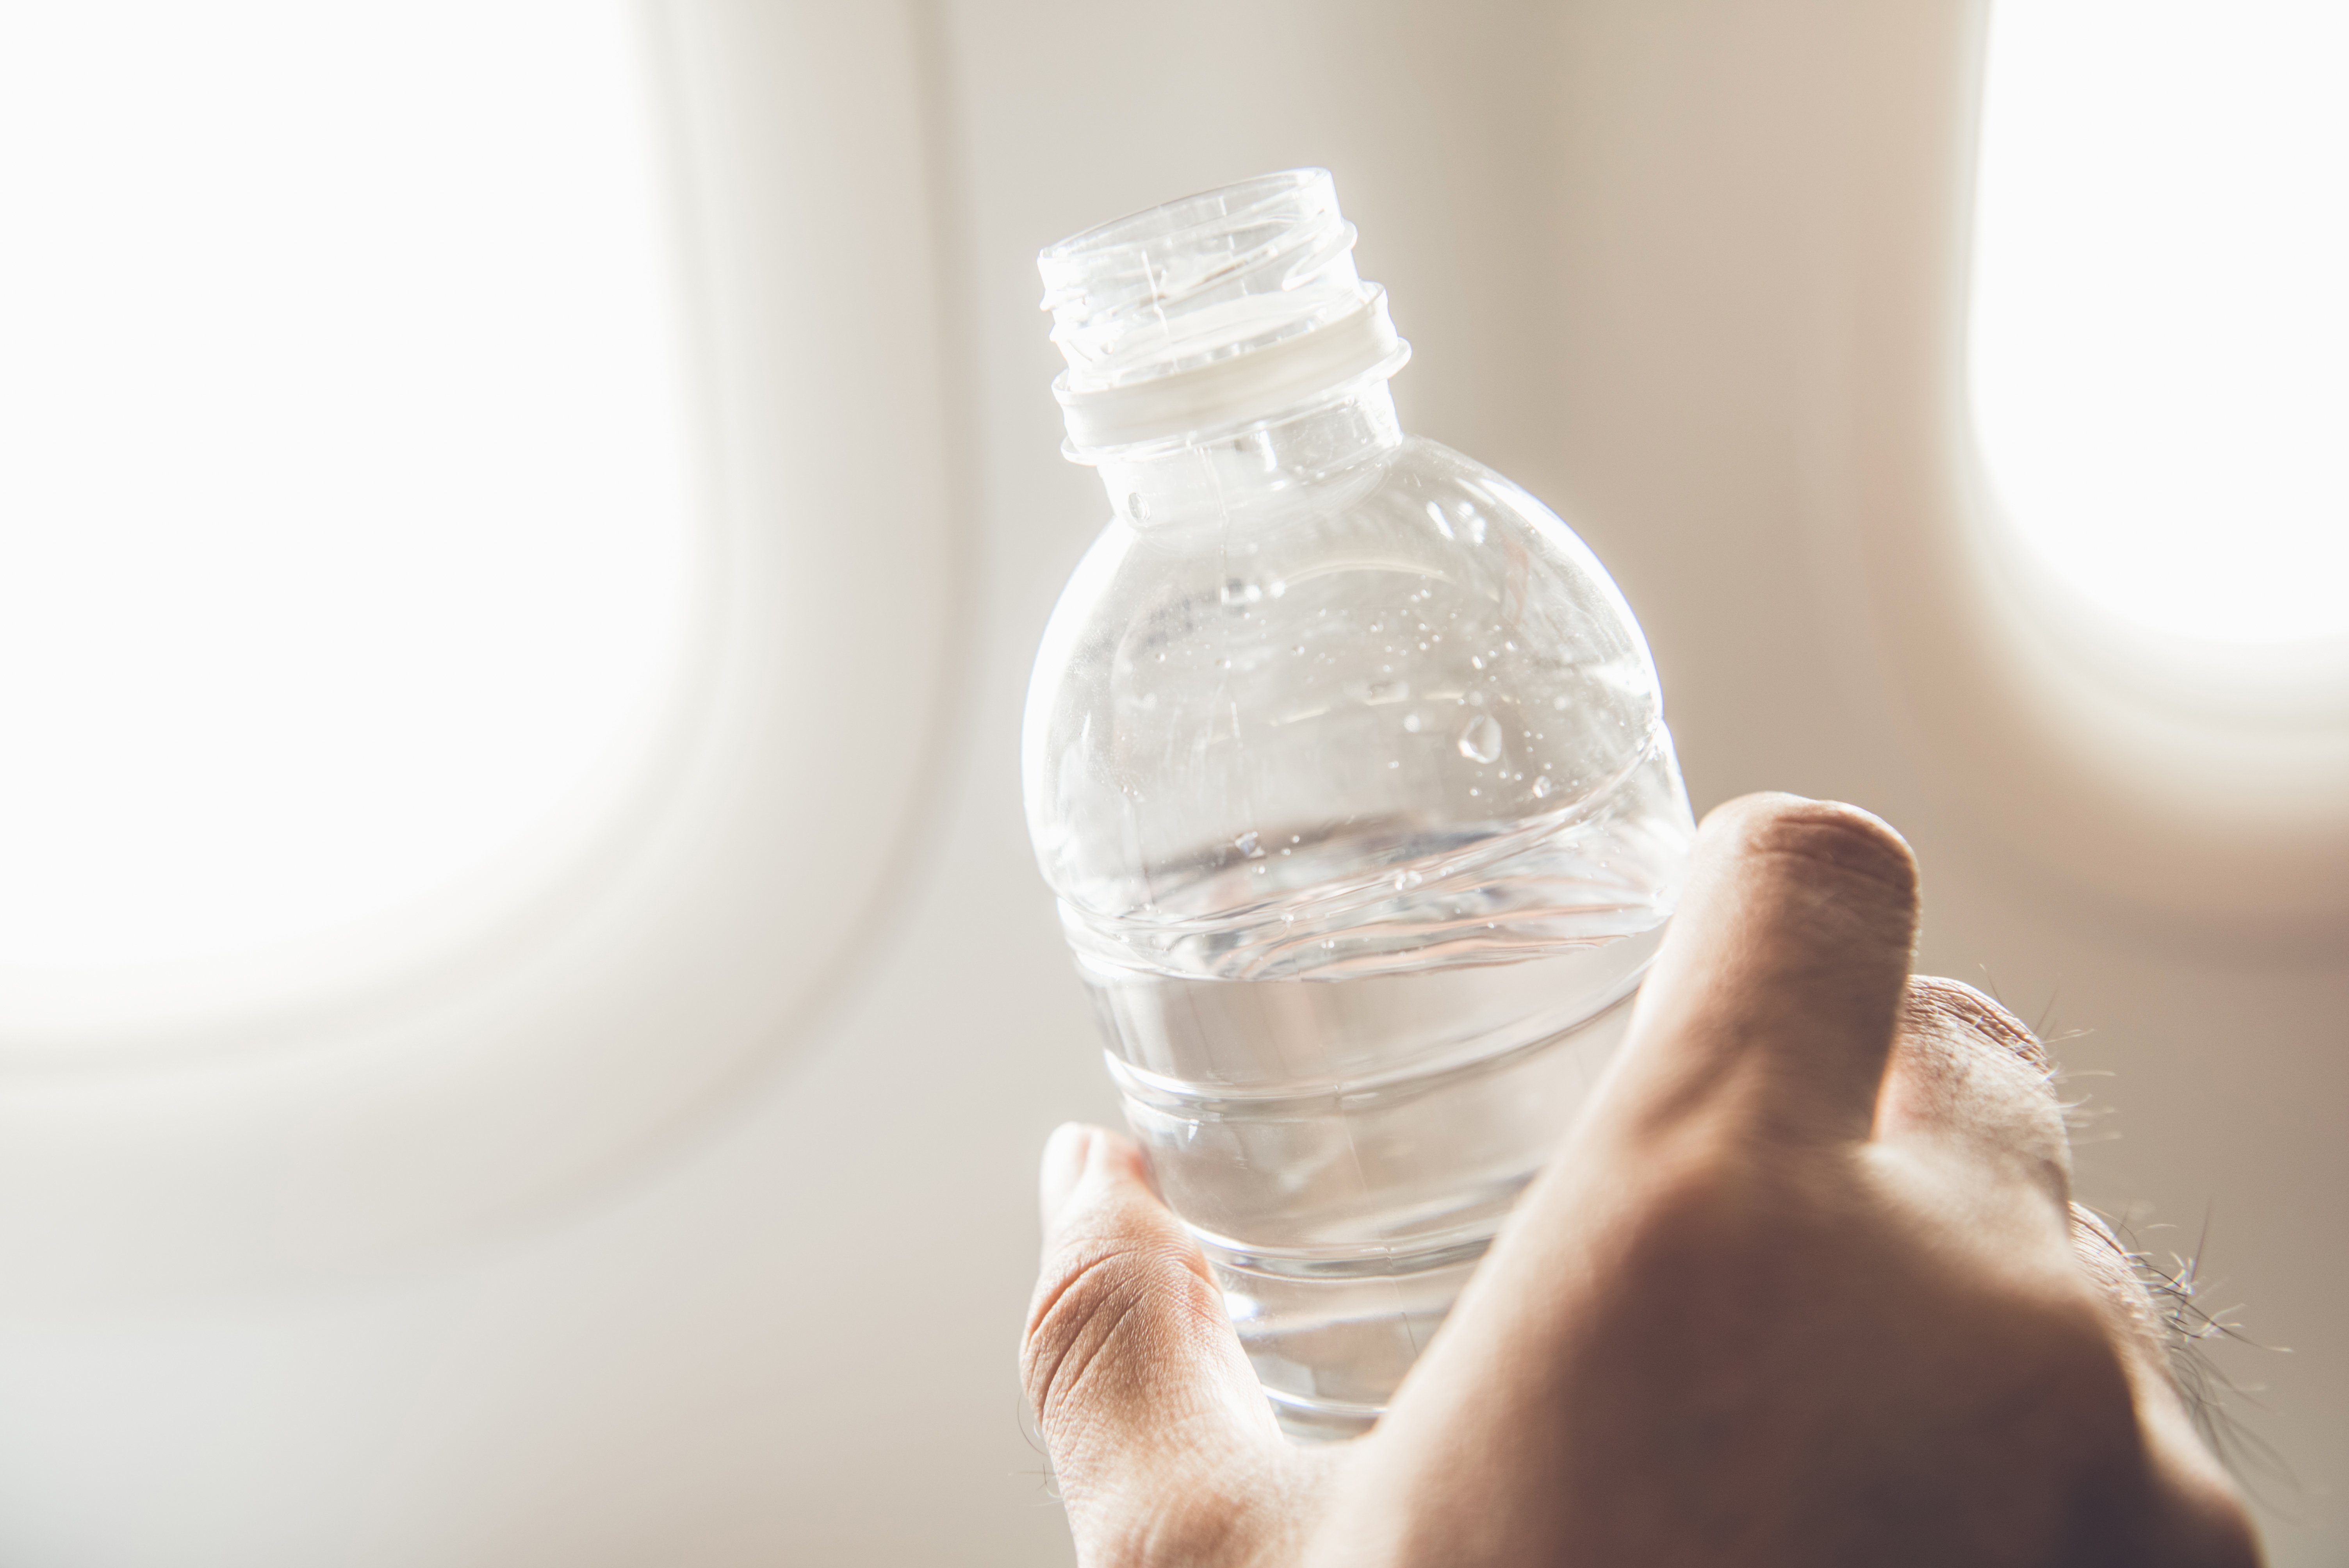 Passenger holding bottle of water about to drink preventing dehydration while traveling on the plane 